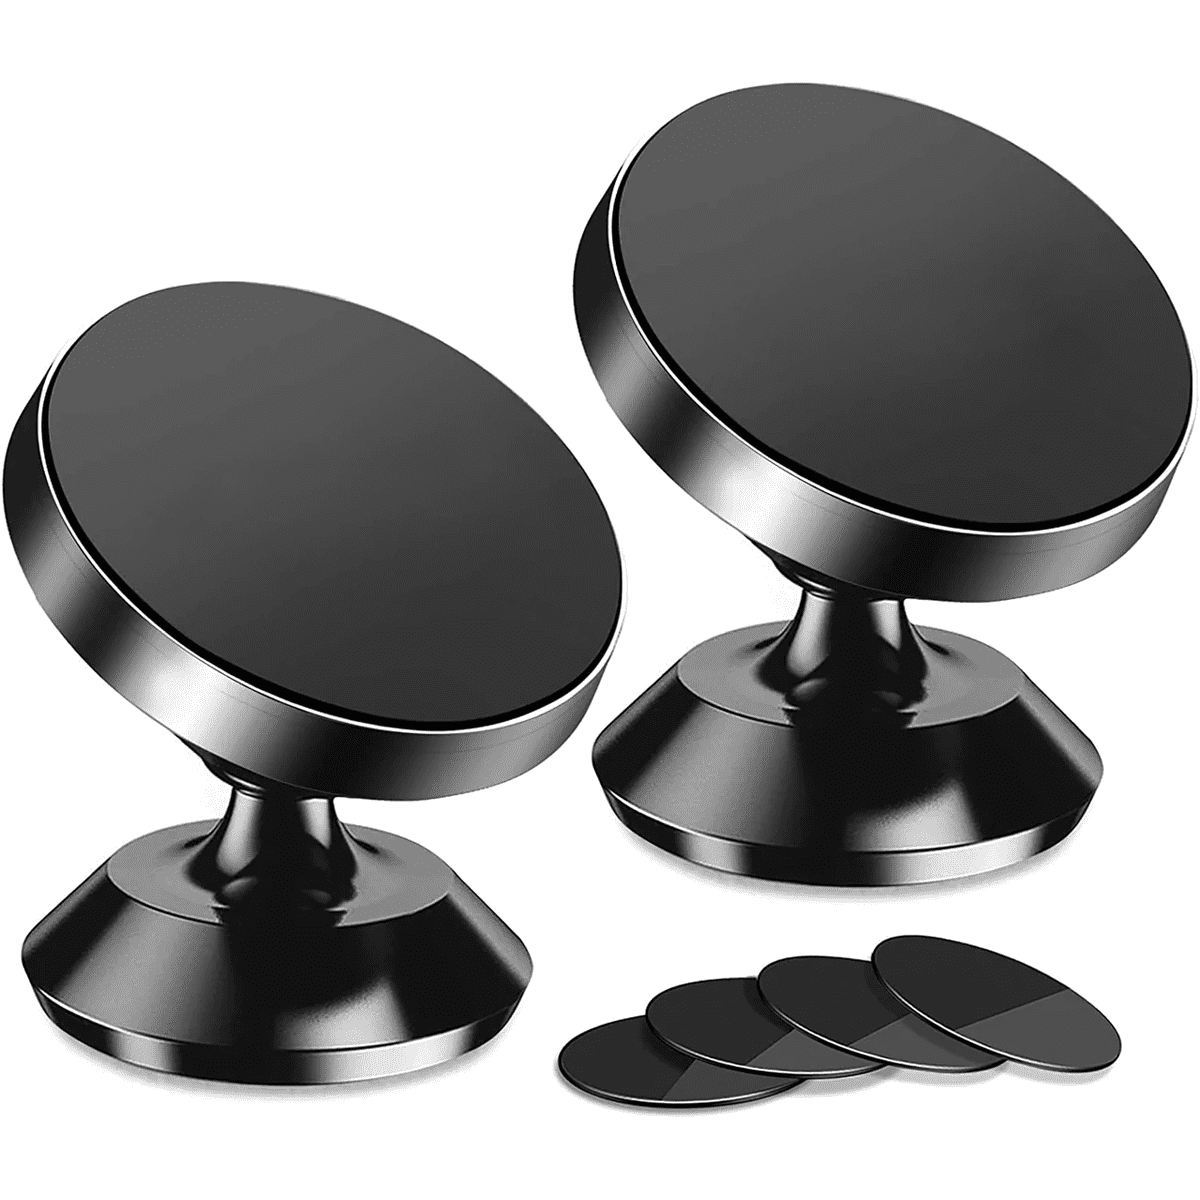 Custom Text Magnetic Phone Mount, Super Strong Magnet with 4 Metal Plate, Car Magnetic Phone Holder, 360° Rotation, Universal Dashboard car Mount Fits All Cell Phones, Set of 2 - Delicate Leather